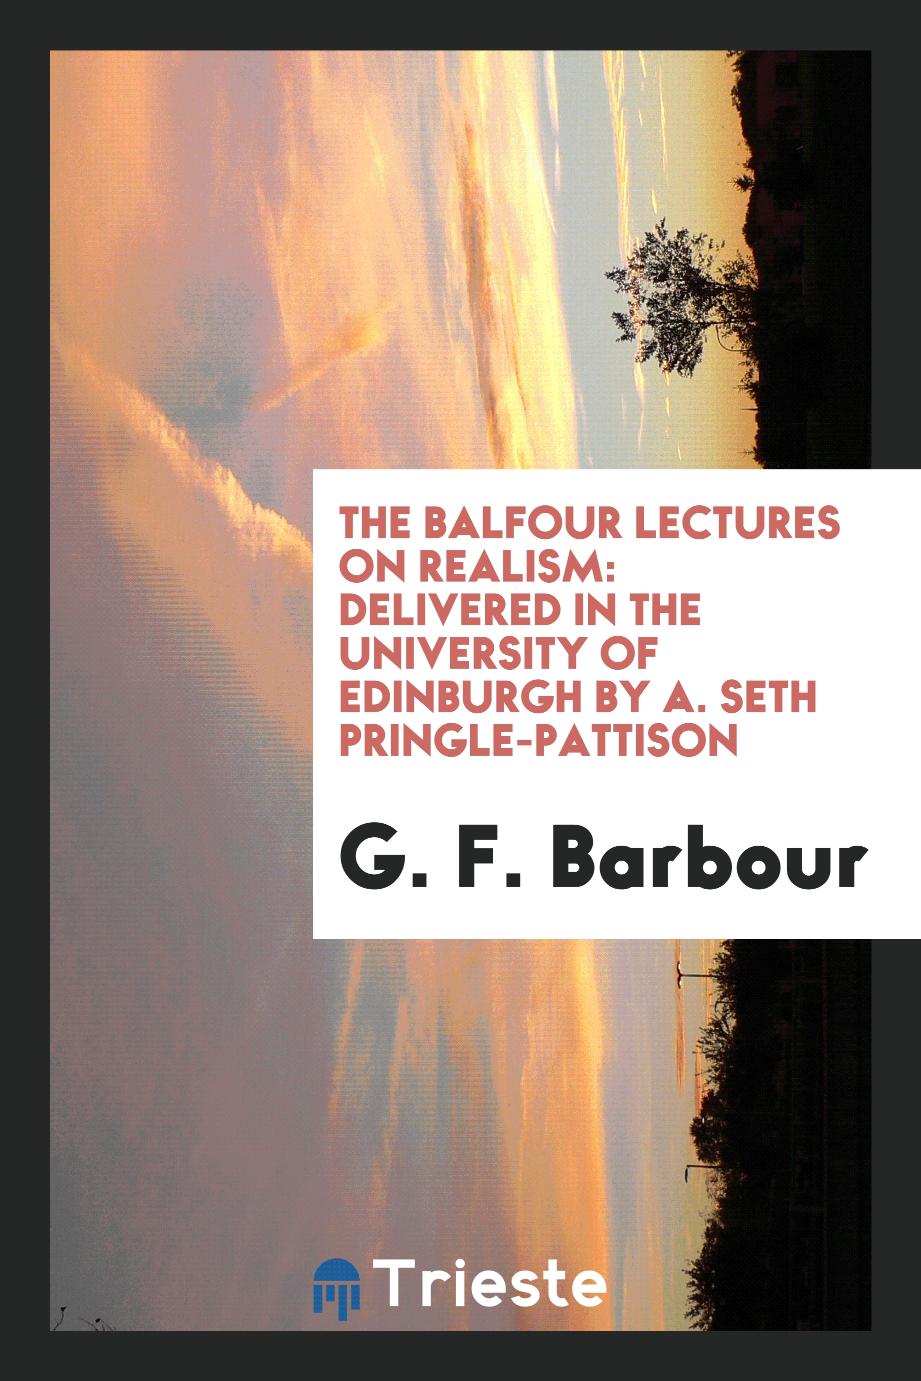 The Balfour Lectures on Realism: delivered in the University of Edinburgh by A. Seth Pringle-Pattison